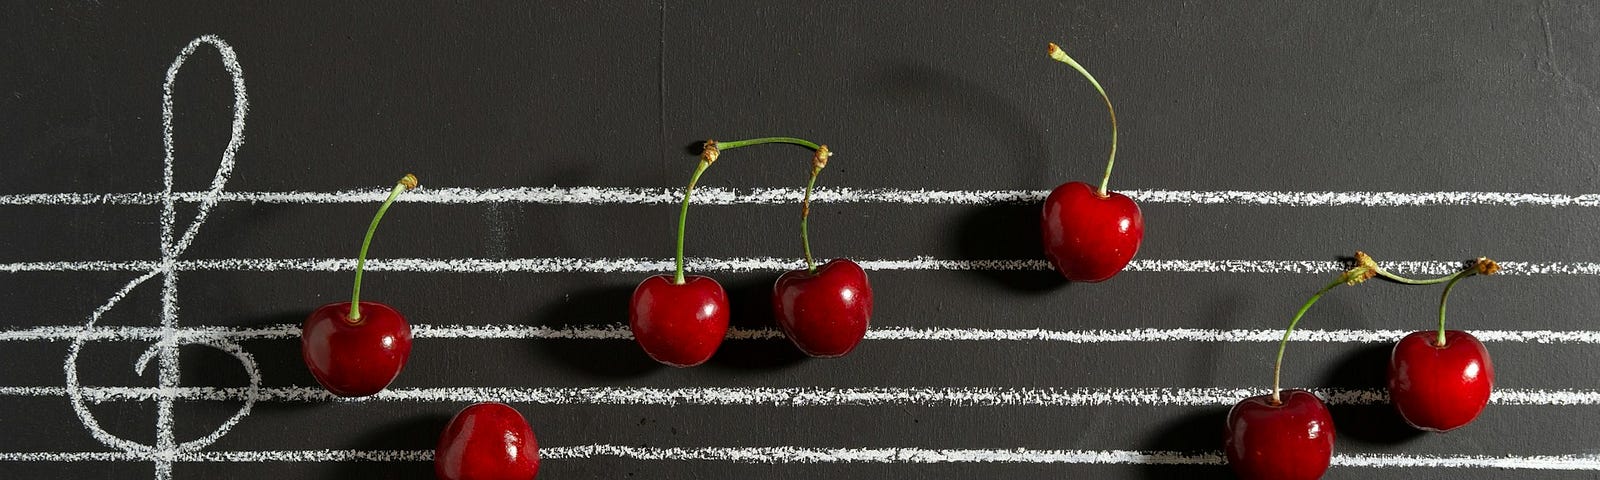 A musical staff written on what looks like a blackboard with cherries as music notes